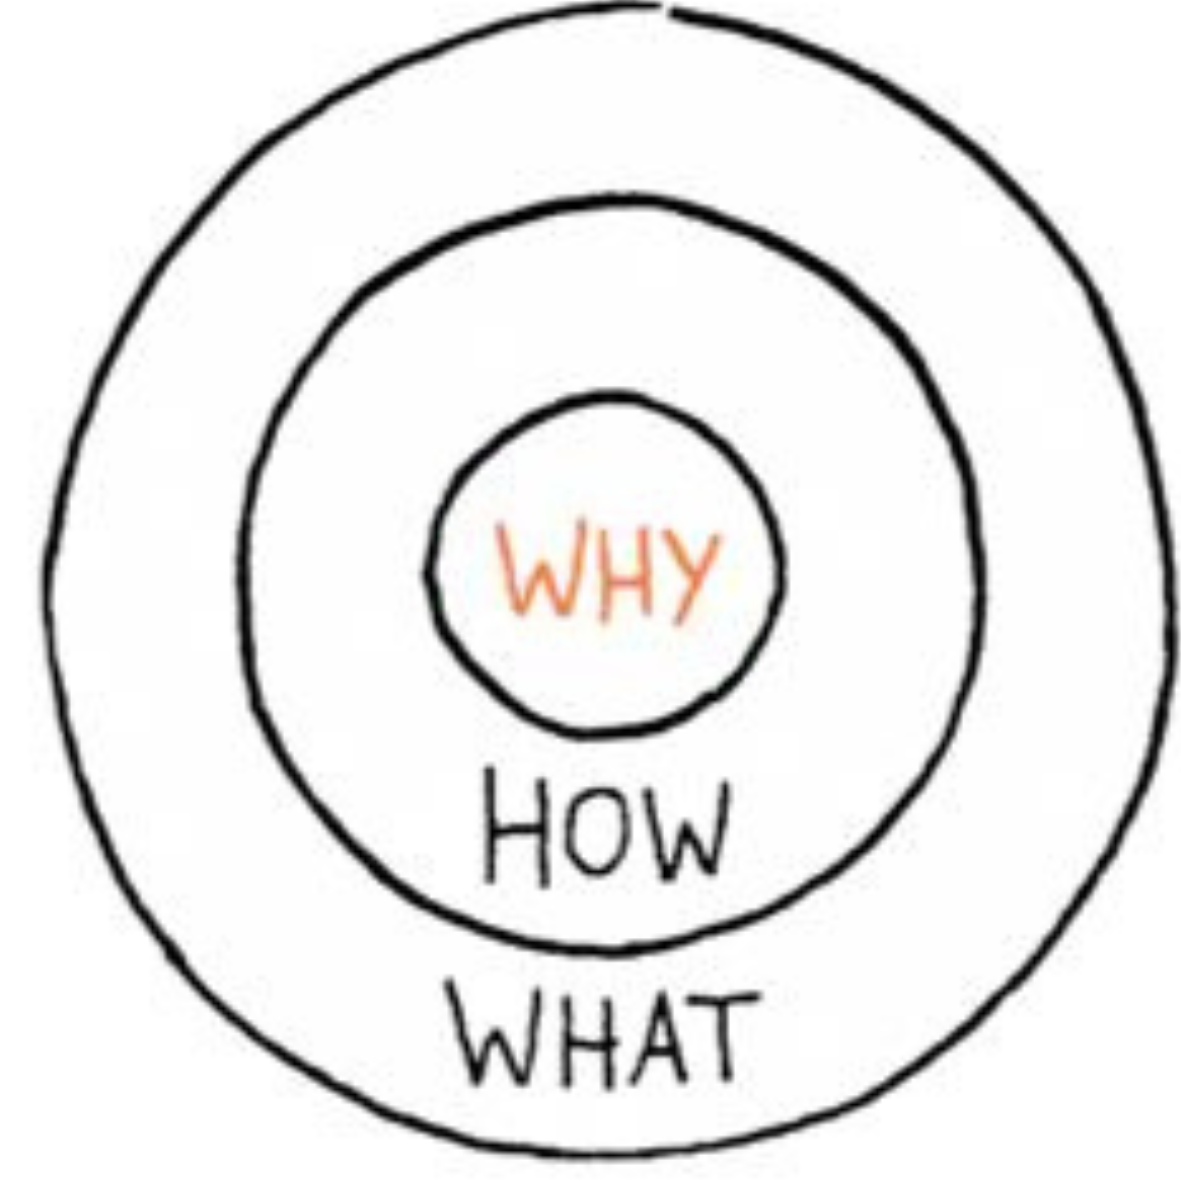 Golden Circle from Start with Why book review